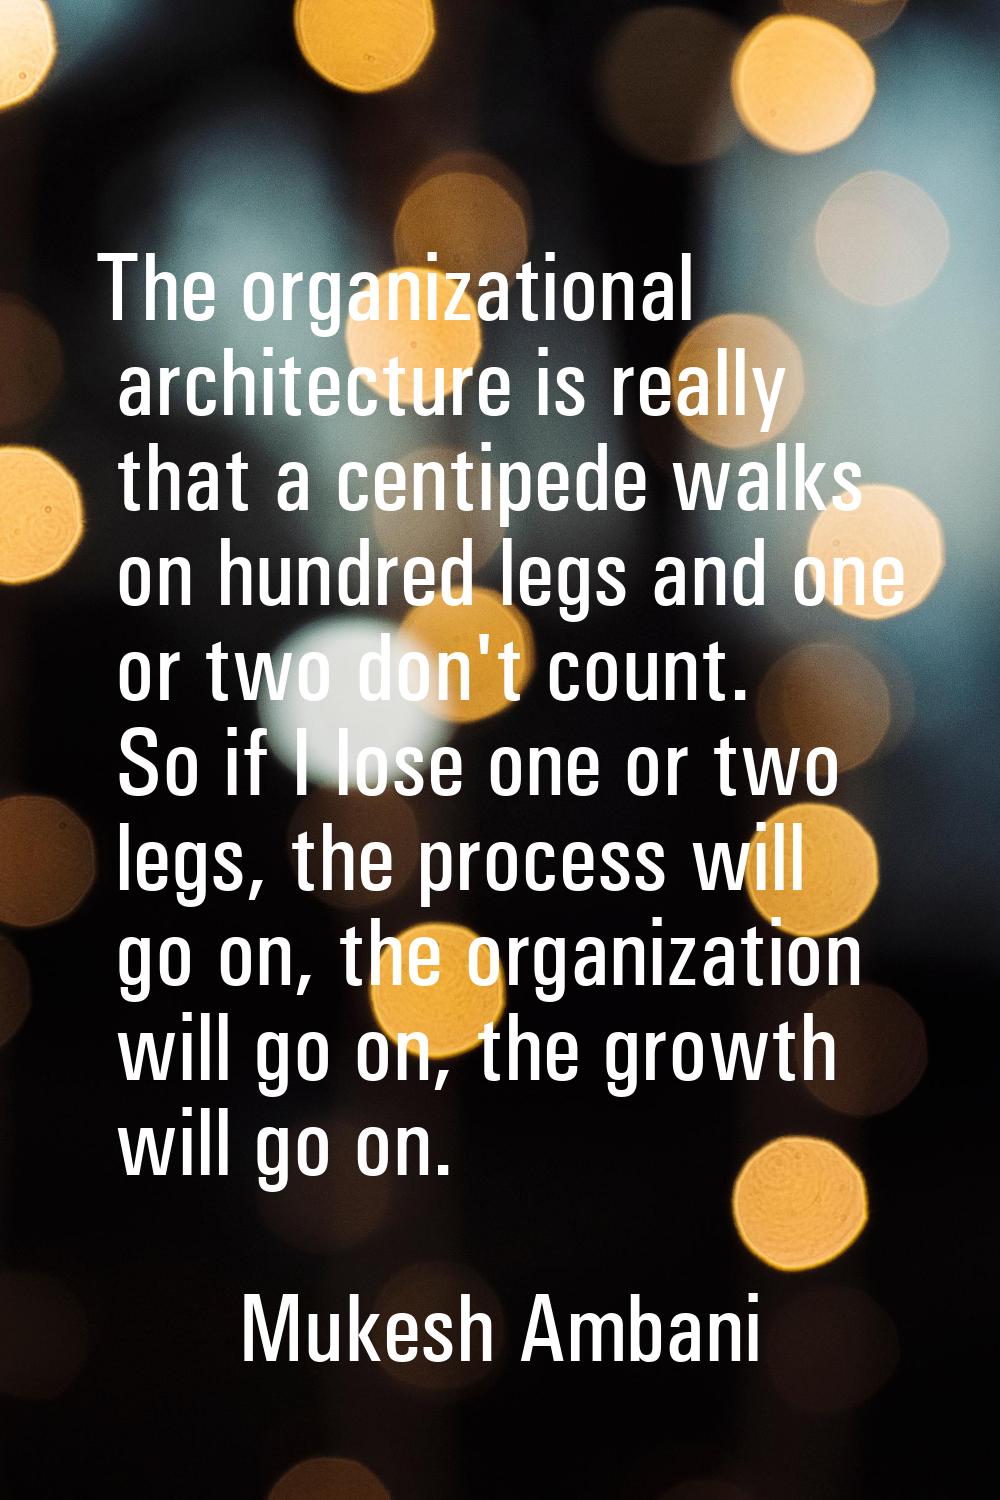 The organizational architecture is really that a centipede walks on hundred legs and one or two don